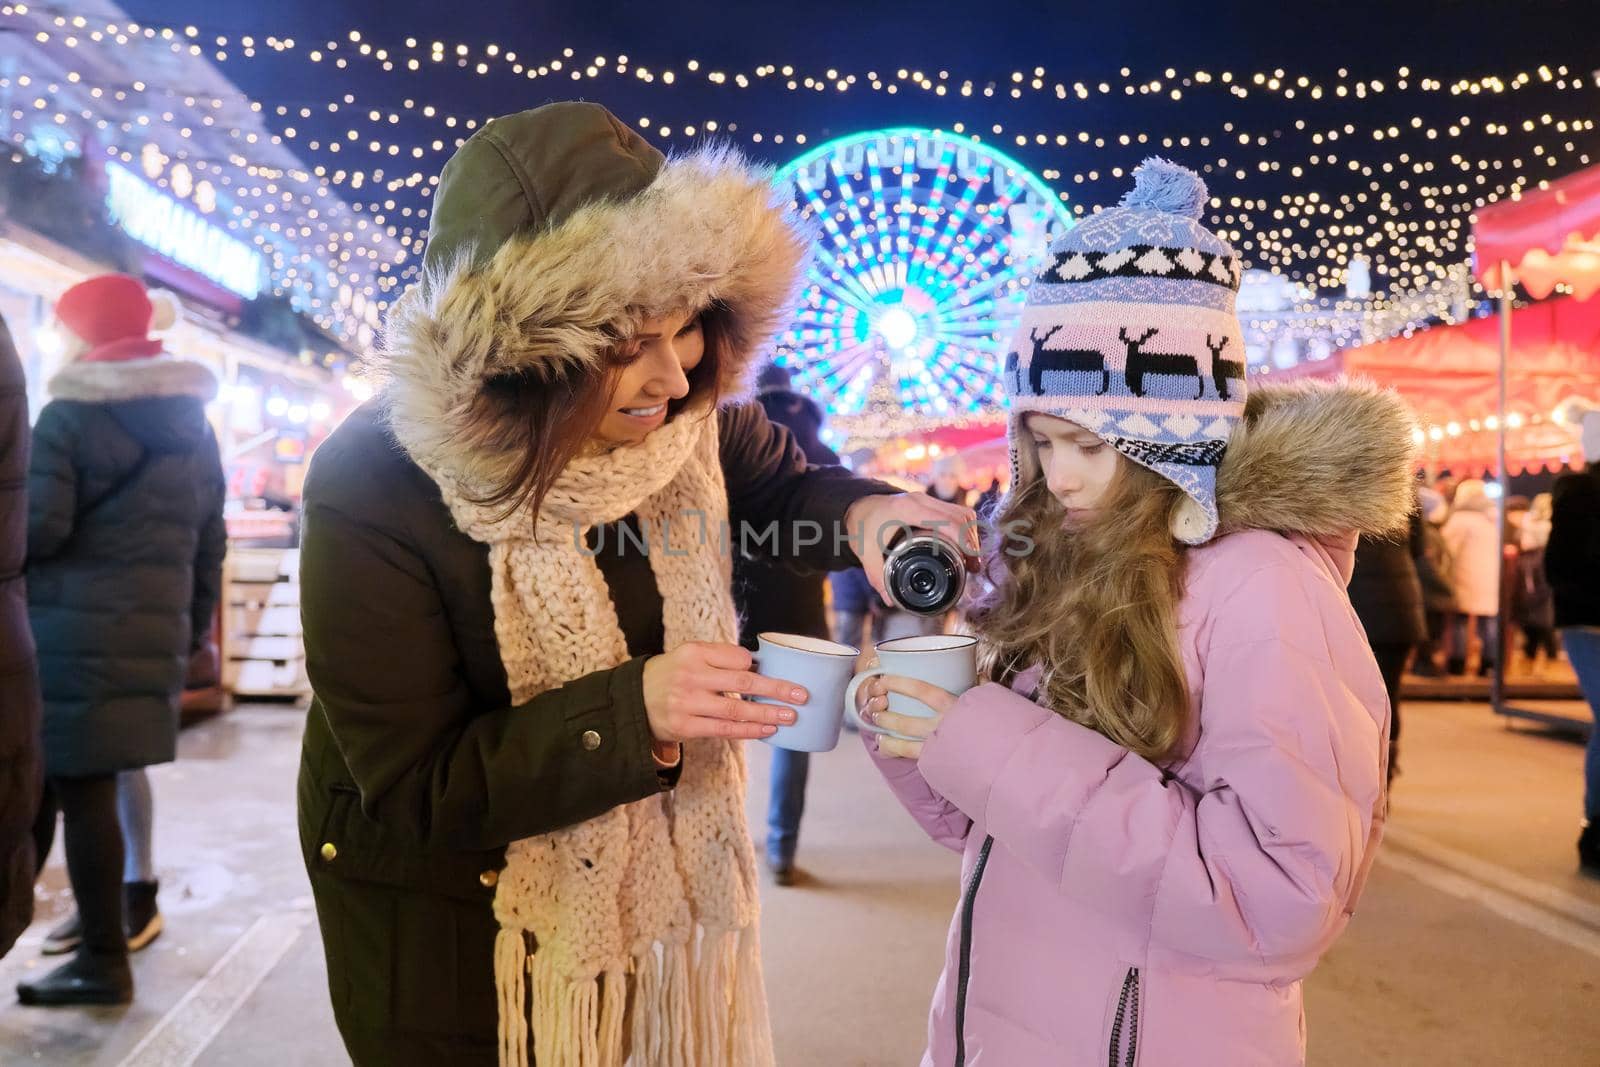 Christmas and New Year holidays, happy mom and daughter kid walking together drinking hot mug tea at Christmas market, sparkling lights of garlands of evening city ferris wheel